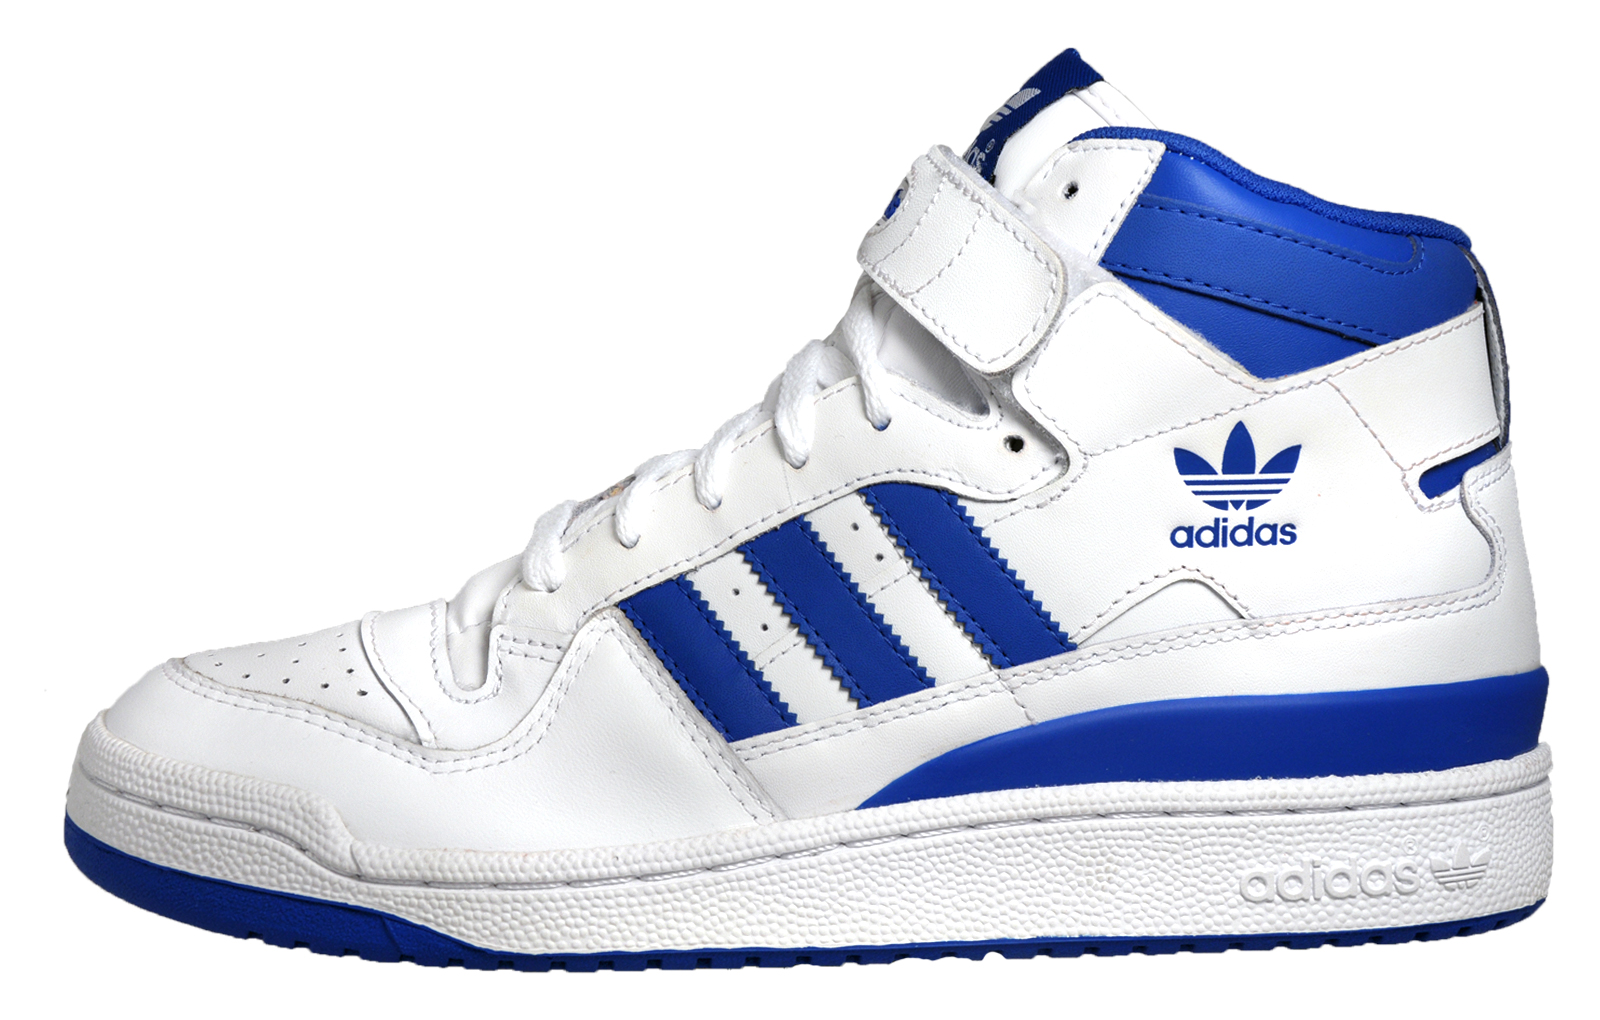 Adidas Originals Forum Mid Mens Basketball Shoes Casual Court Trainers ...